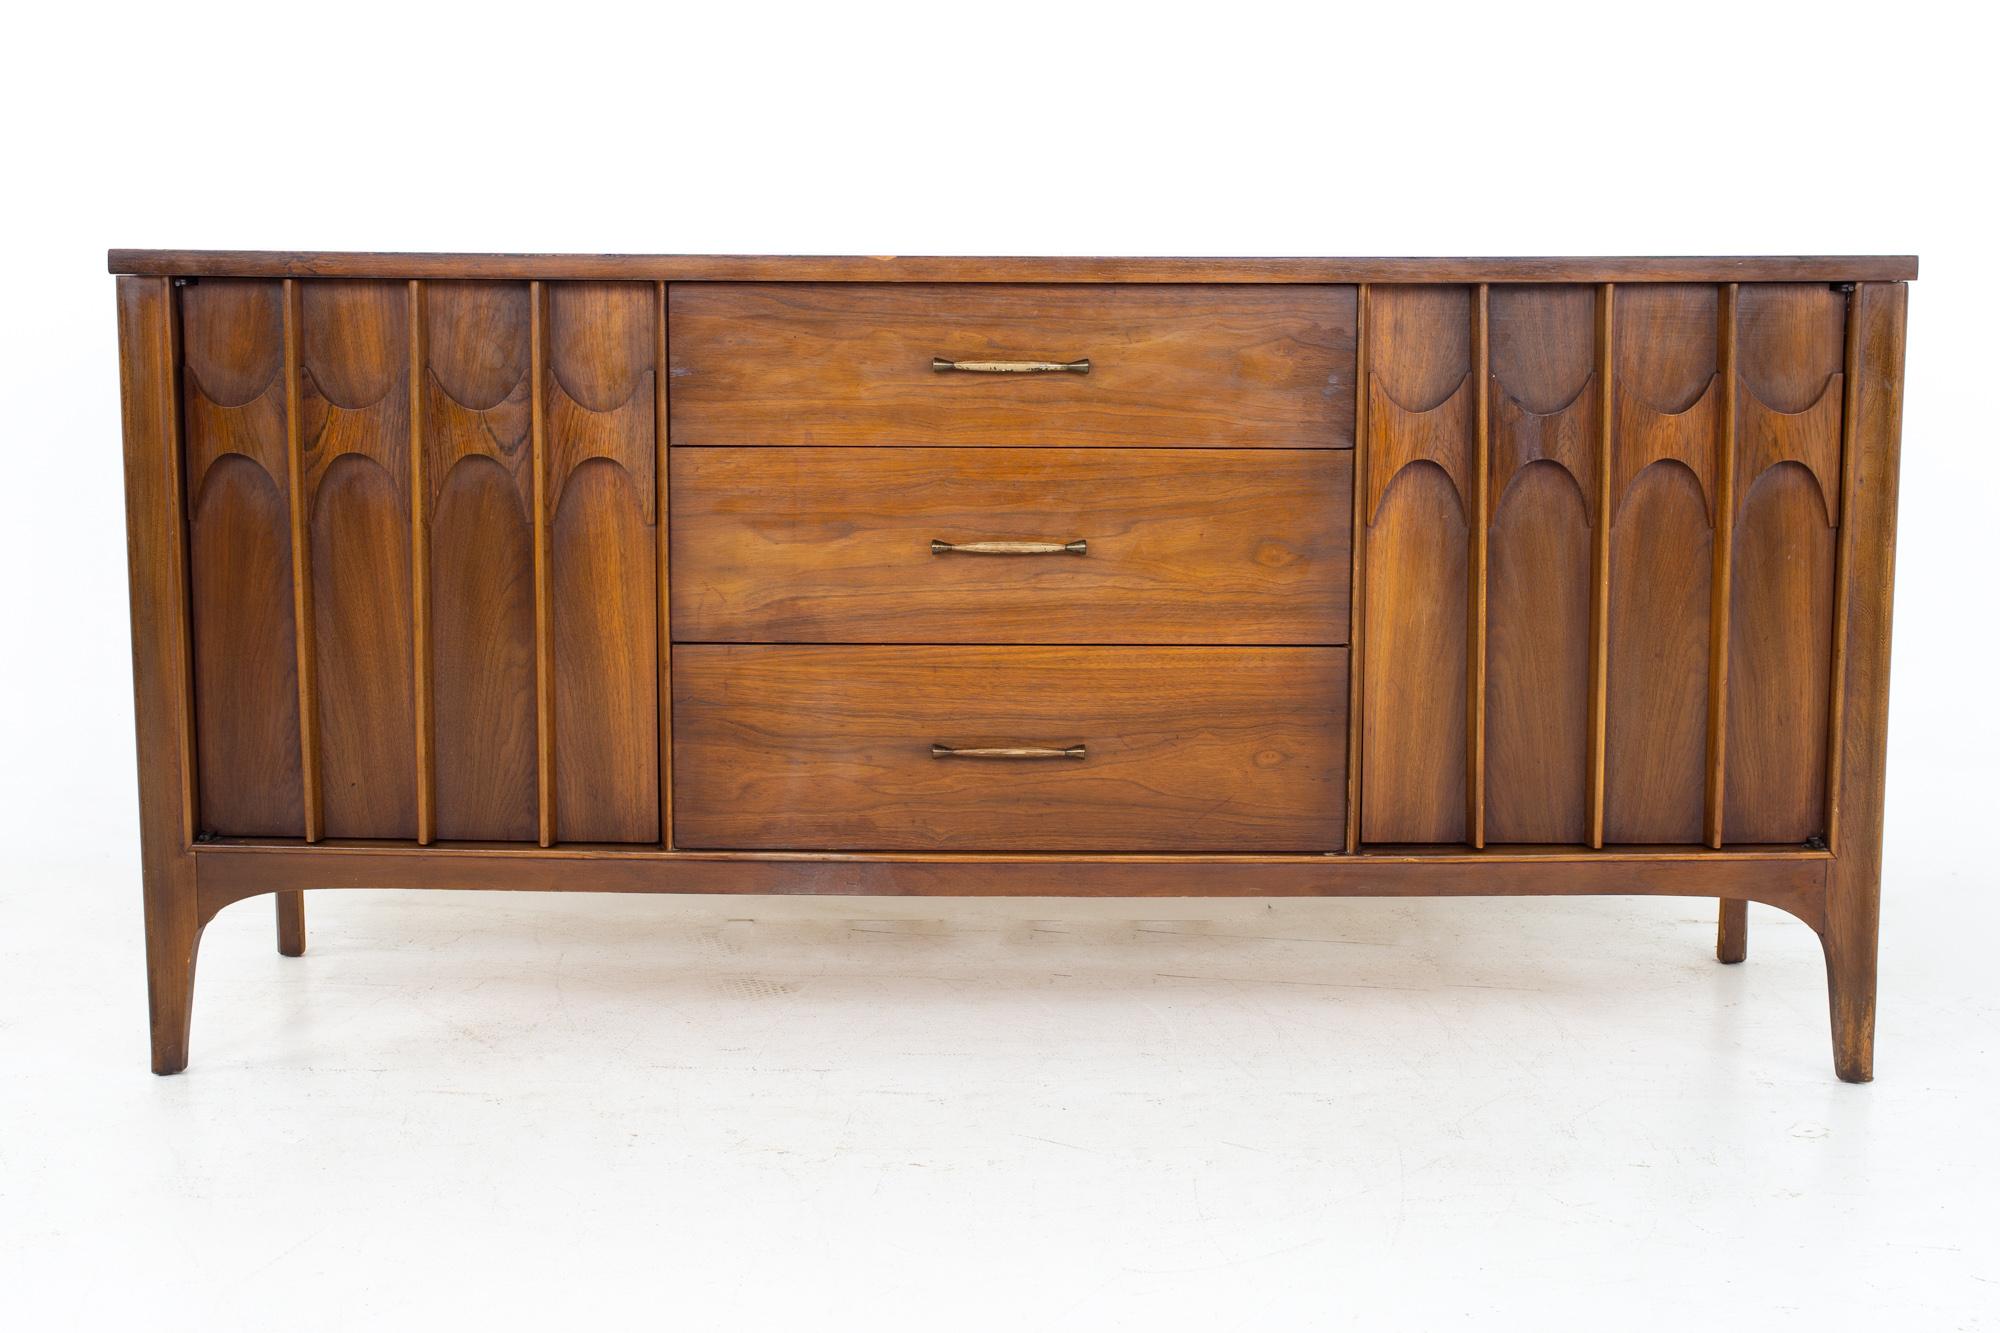 Kent Coffey Perspecta Mid Century Walnut and Rosewood Sideboard Buffet Credenza

Credenza measures: 65.25 wide x 18.5 deep x 31 inches high

All pieces of furniture can be had in what we call restored vintage condition. That means the piece is